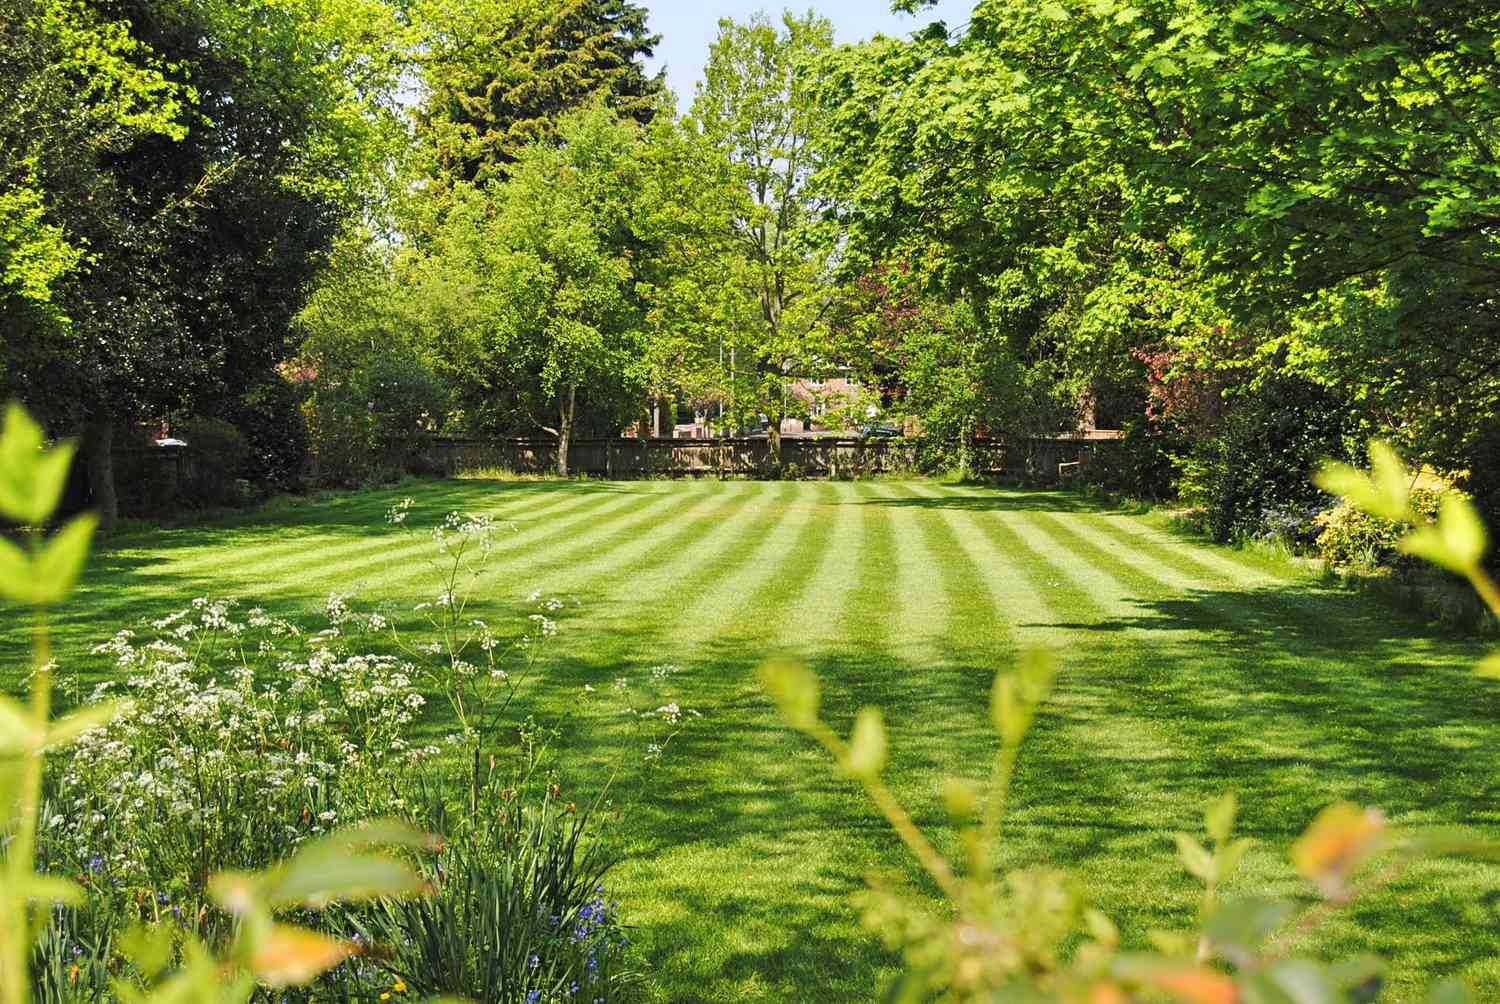 How Often Should You Mow Your Lawn? Experts Weigh In